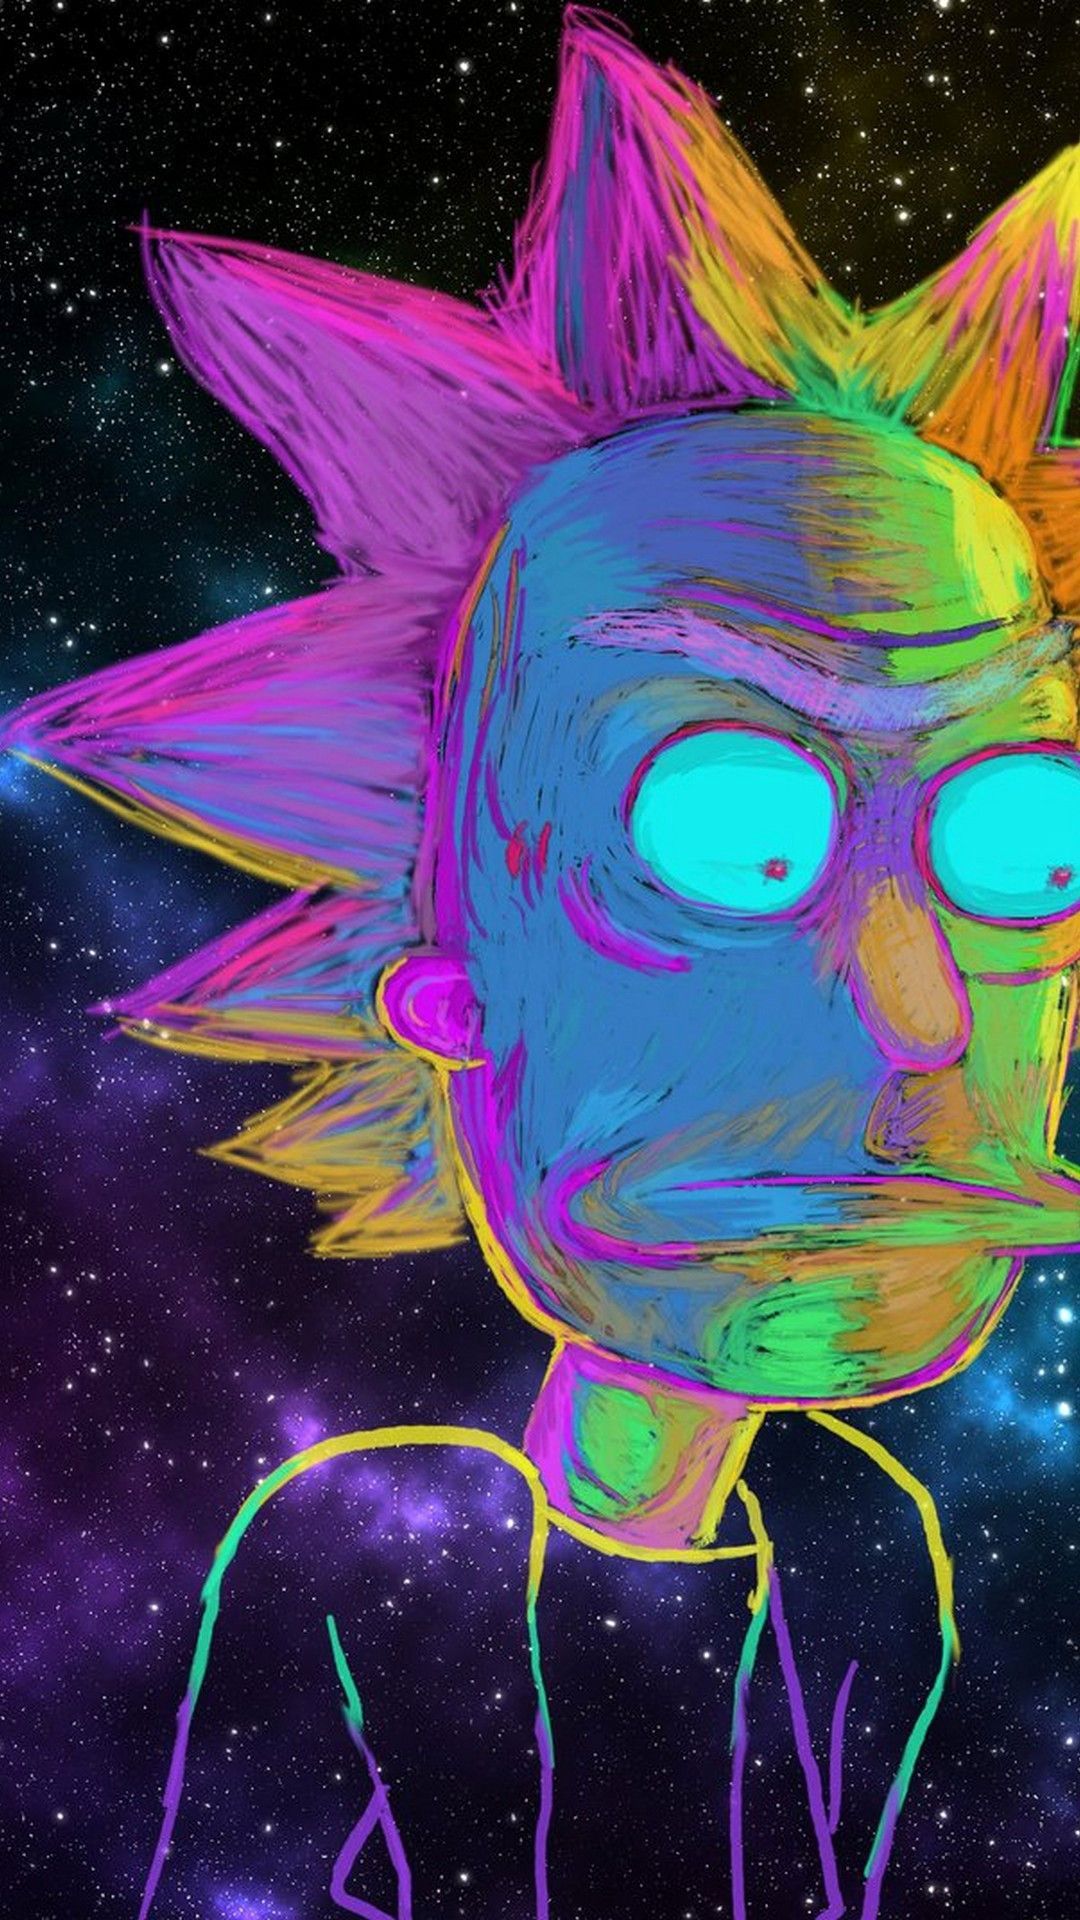 Rick And Morty High Wallpapers Wallpaper Cave